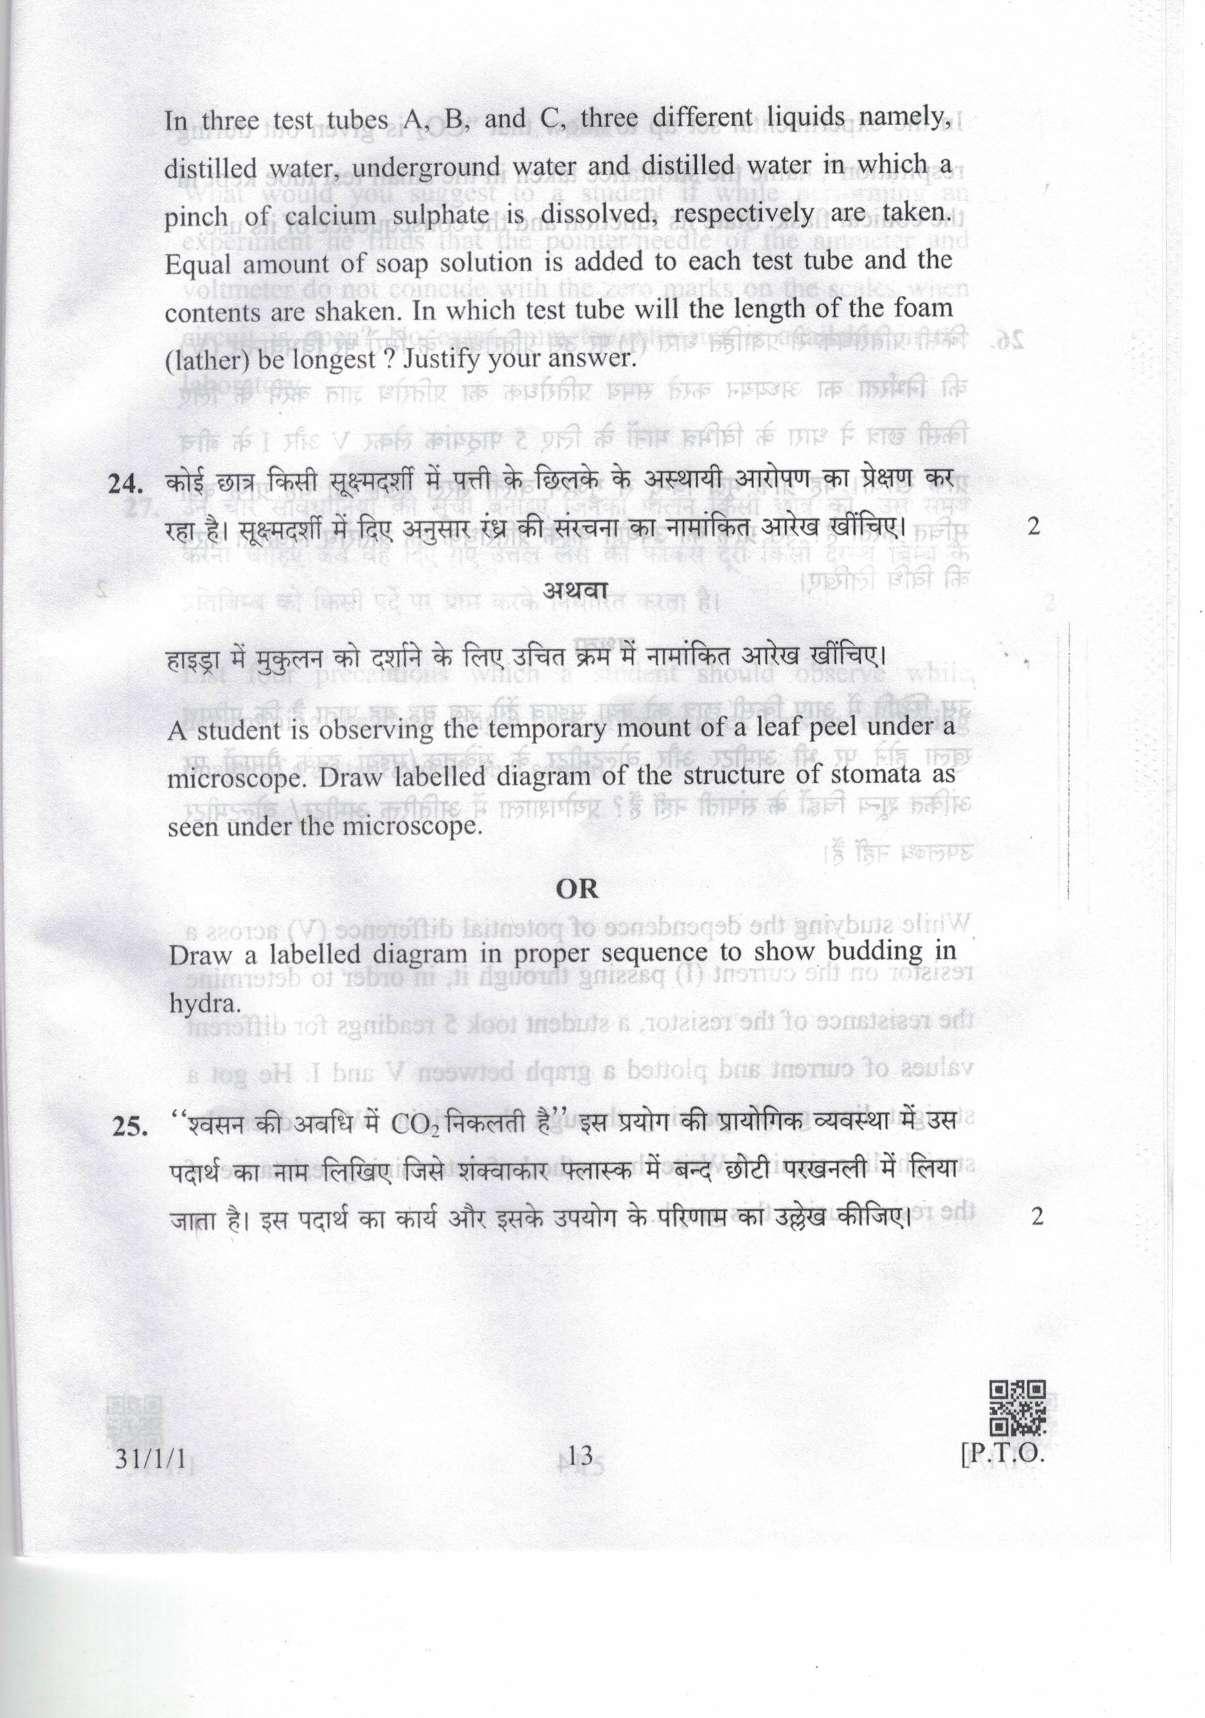 CBSE Class 10 31-1-1 Science 2019 Question Paper - Page 13